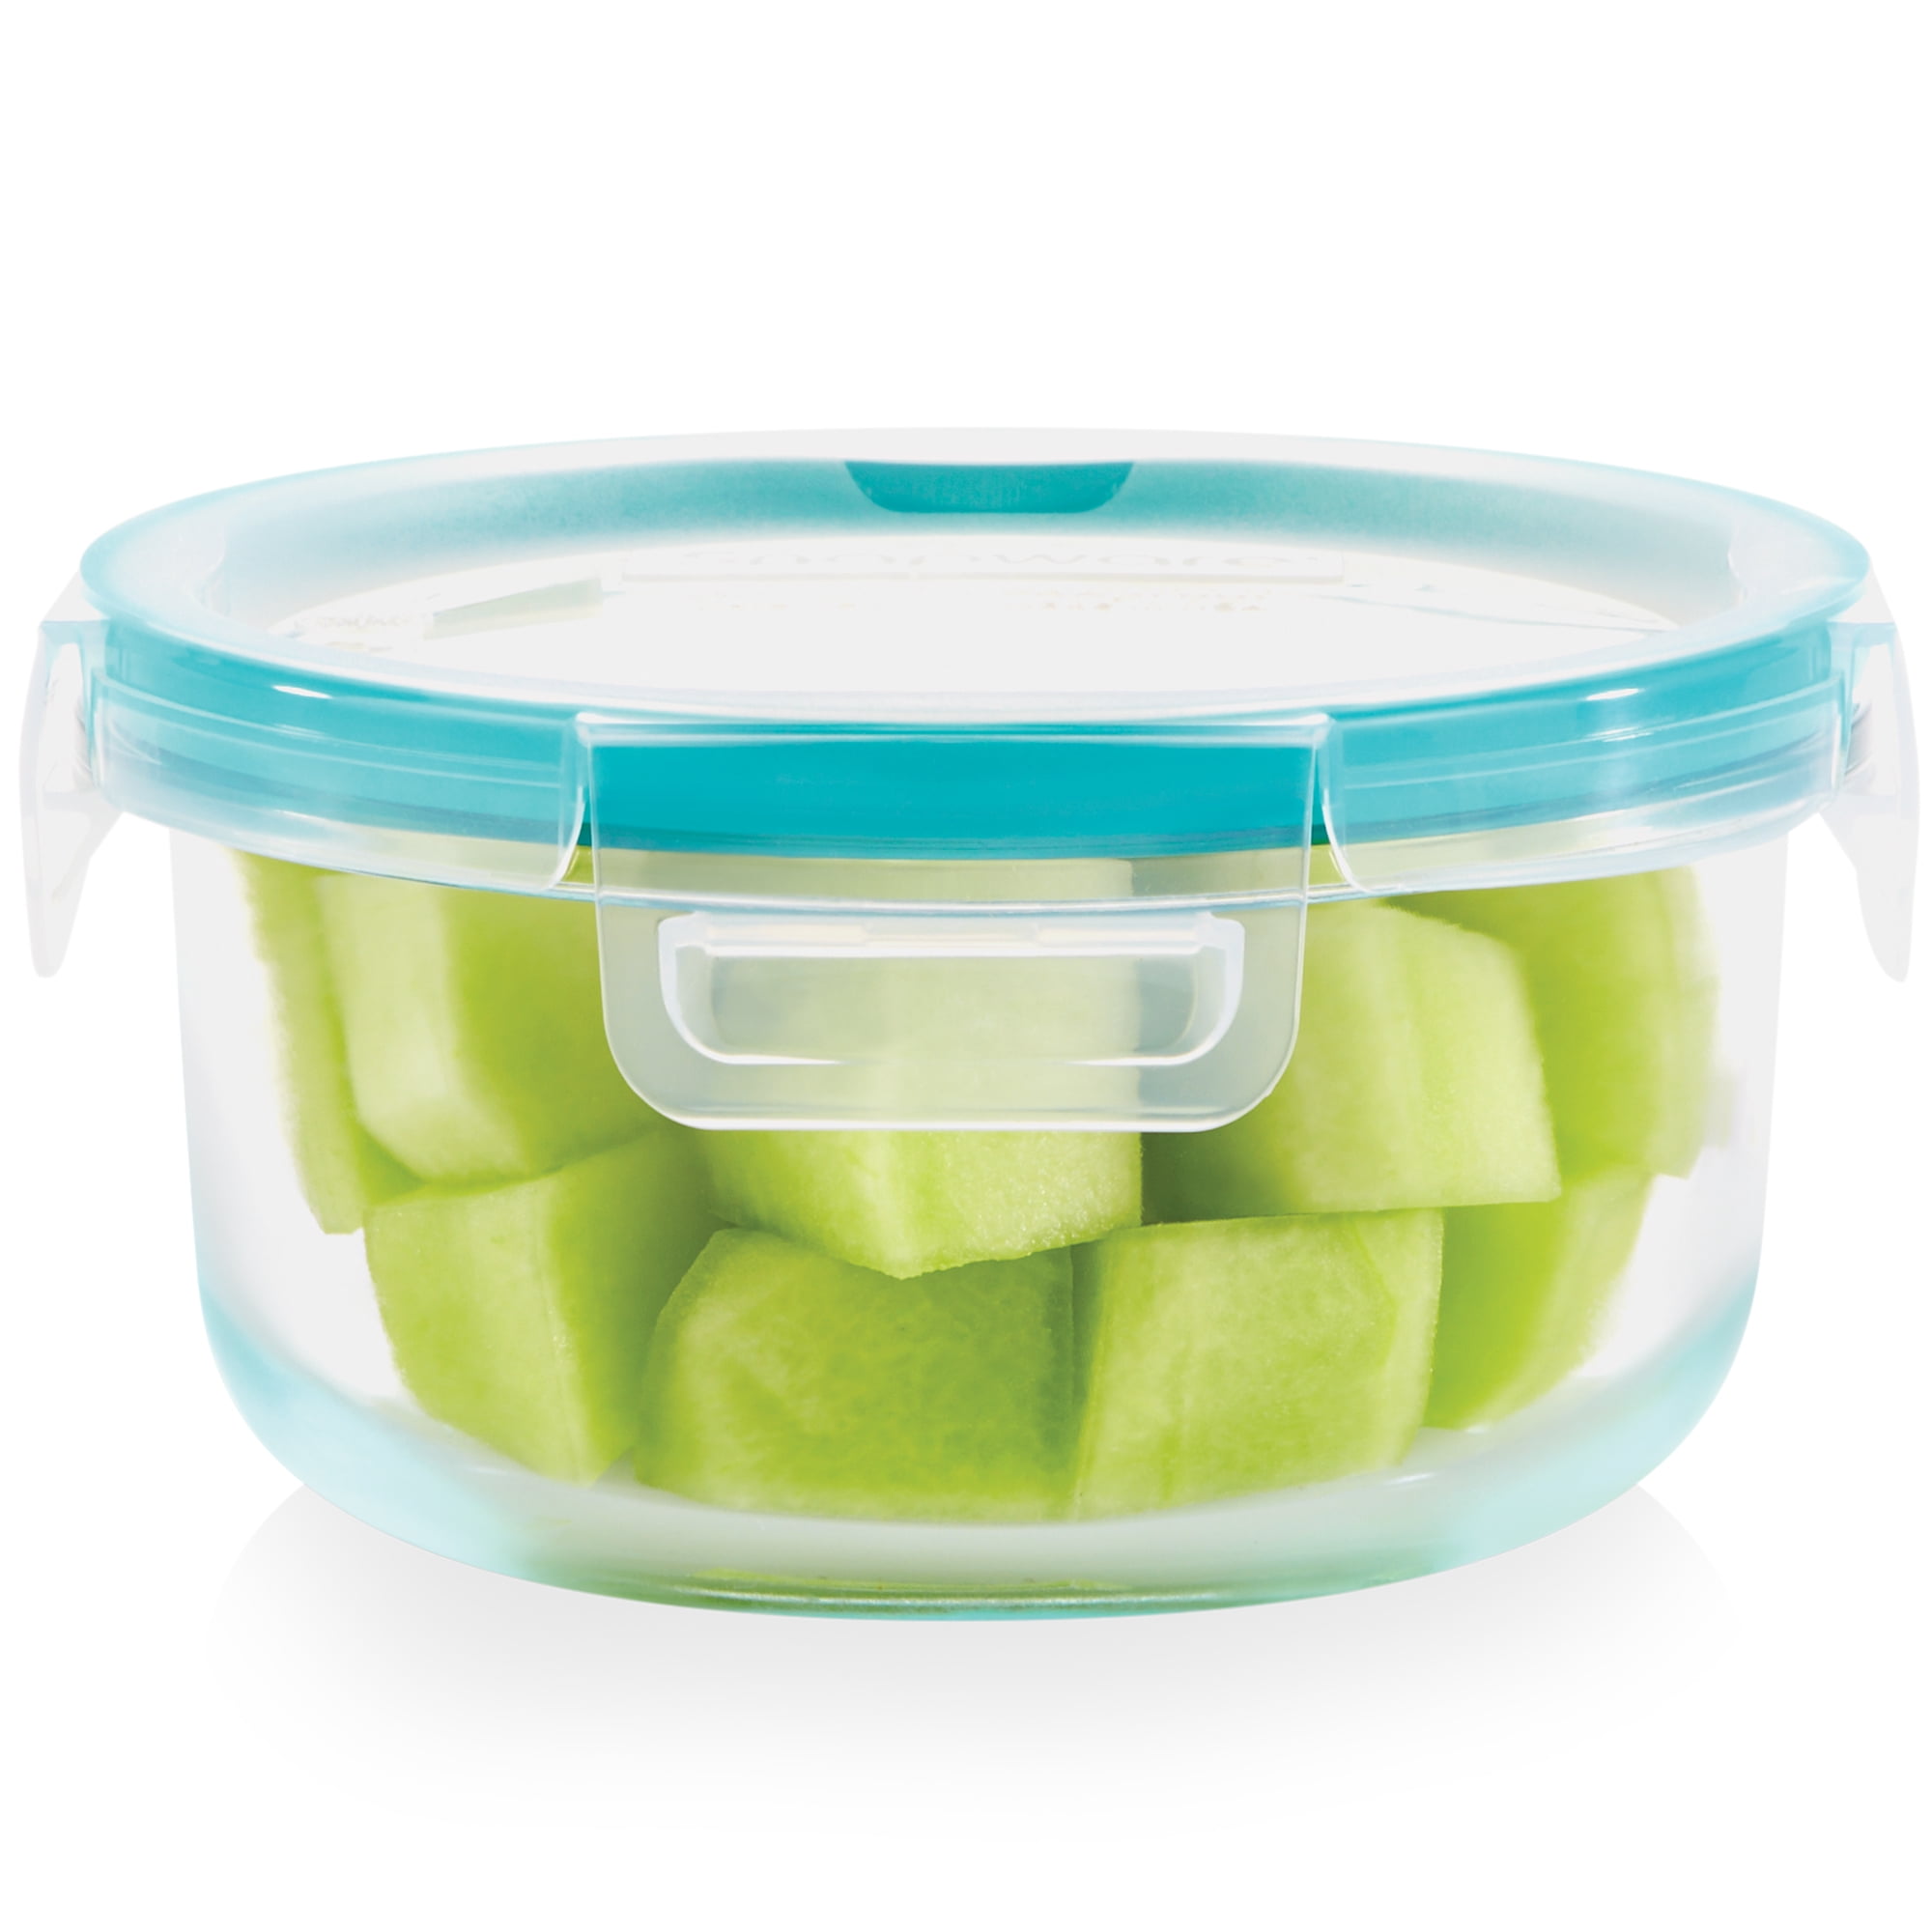 MAPWARE Glass Food Storage Containers with Lids (570ml)